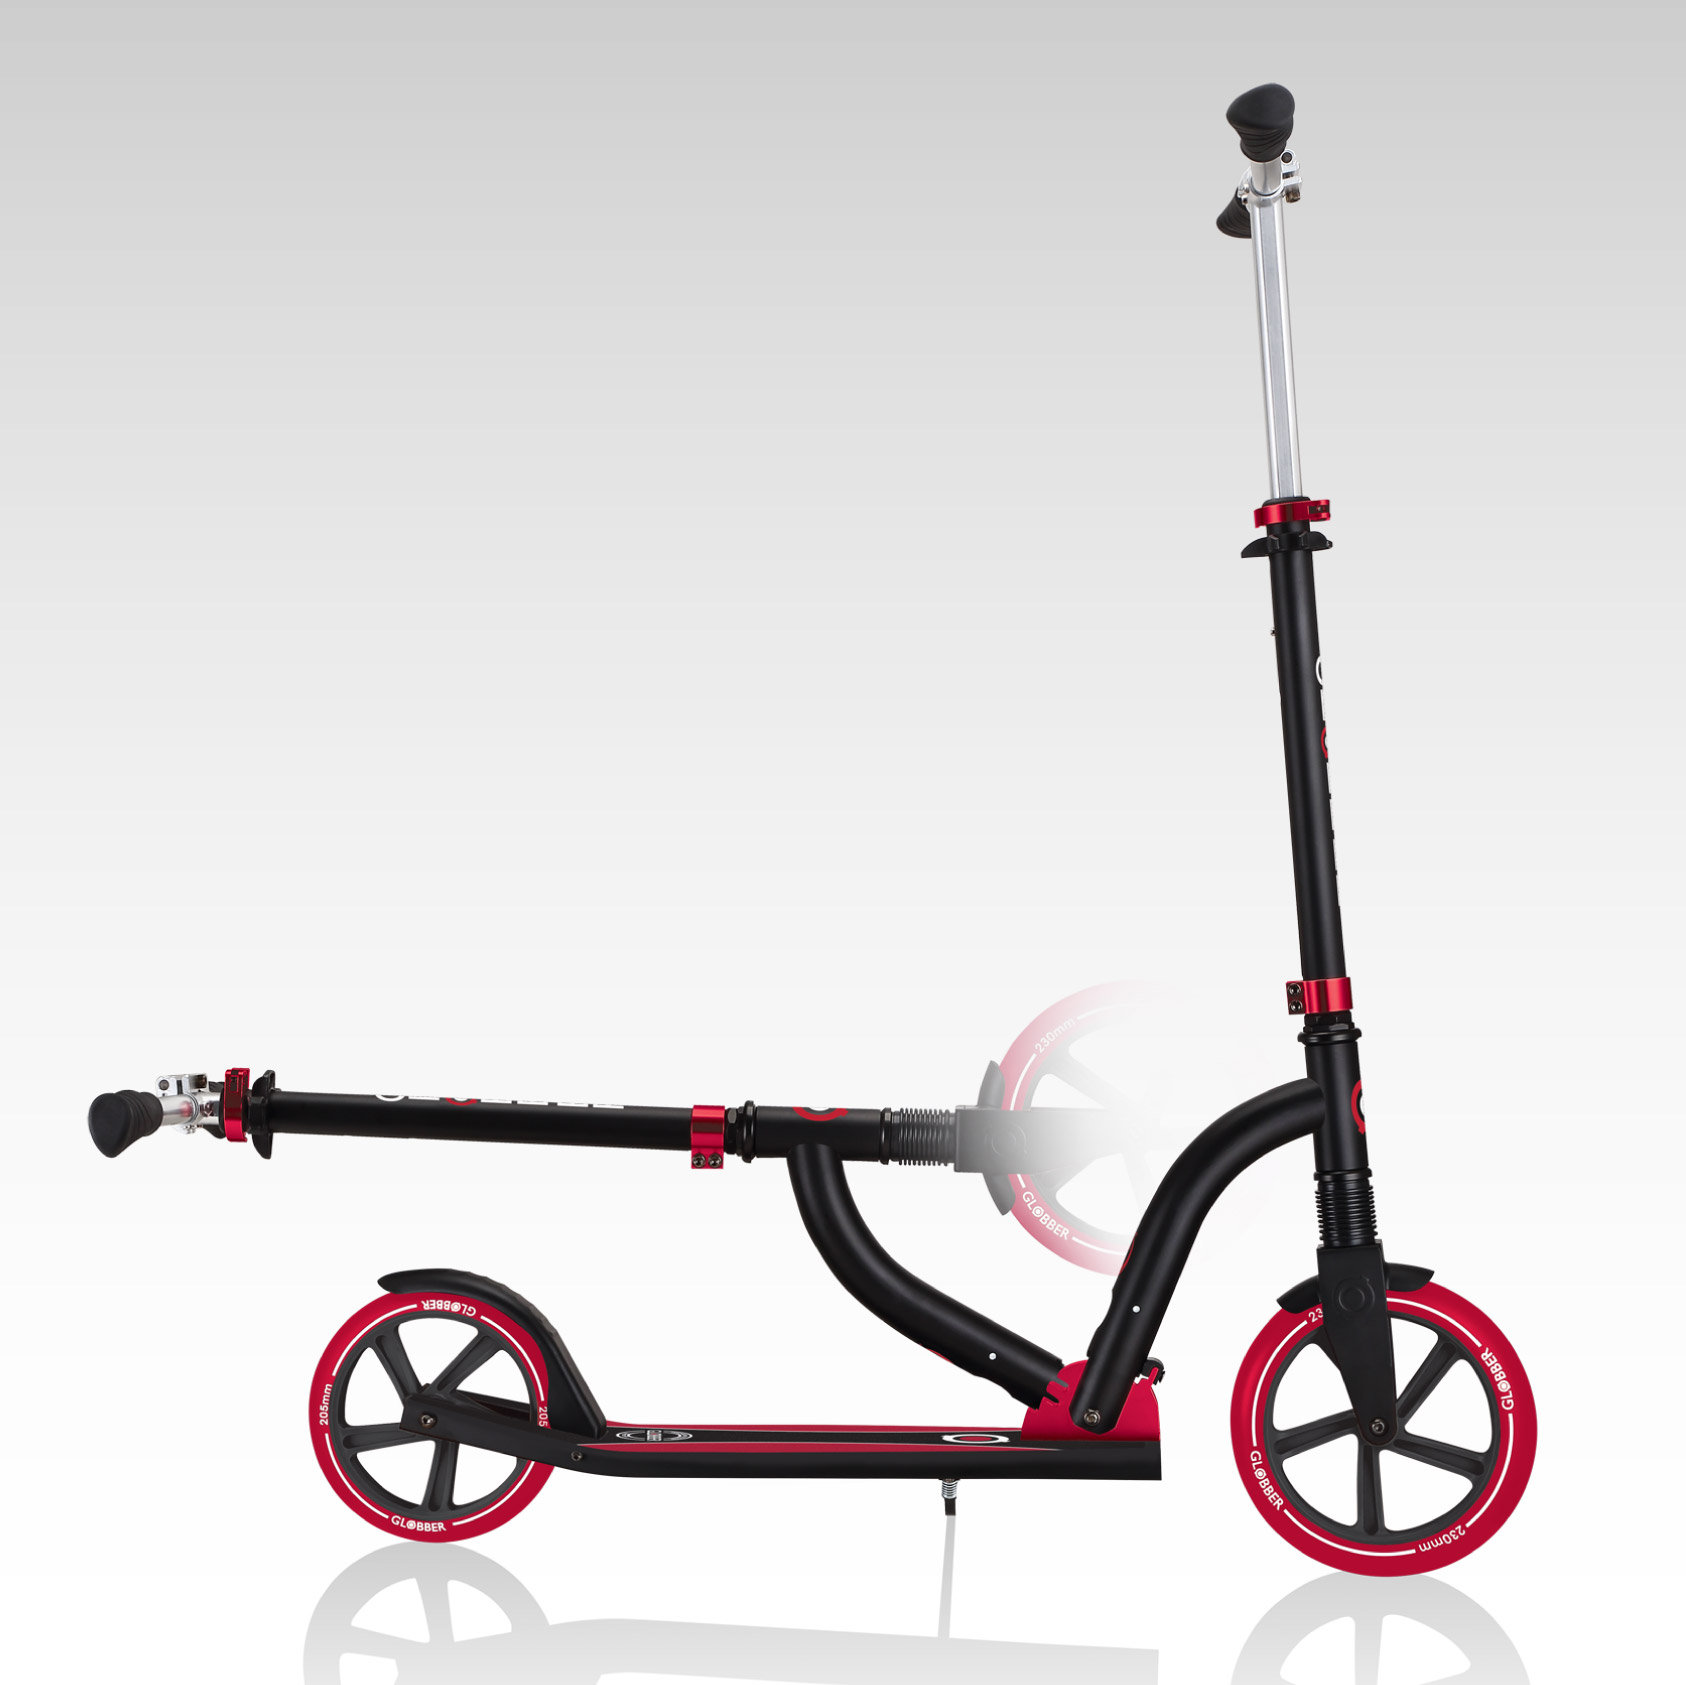 NL 230-205 DUO big wheel foldable scooter for kids